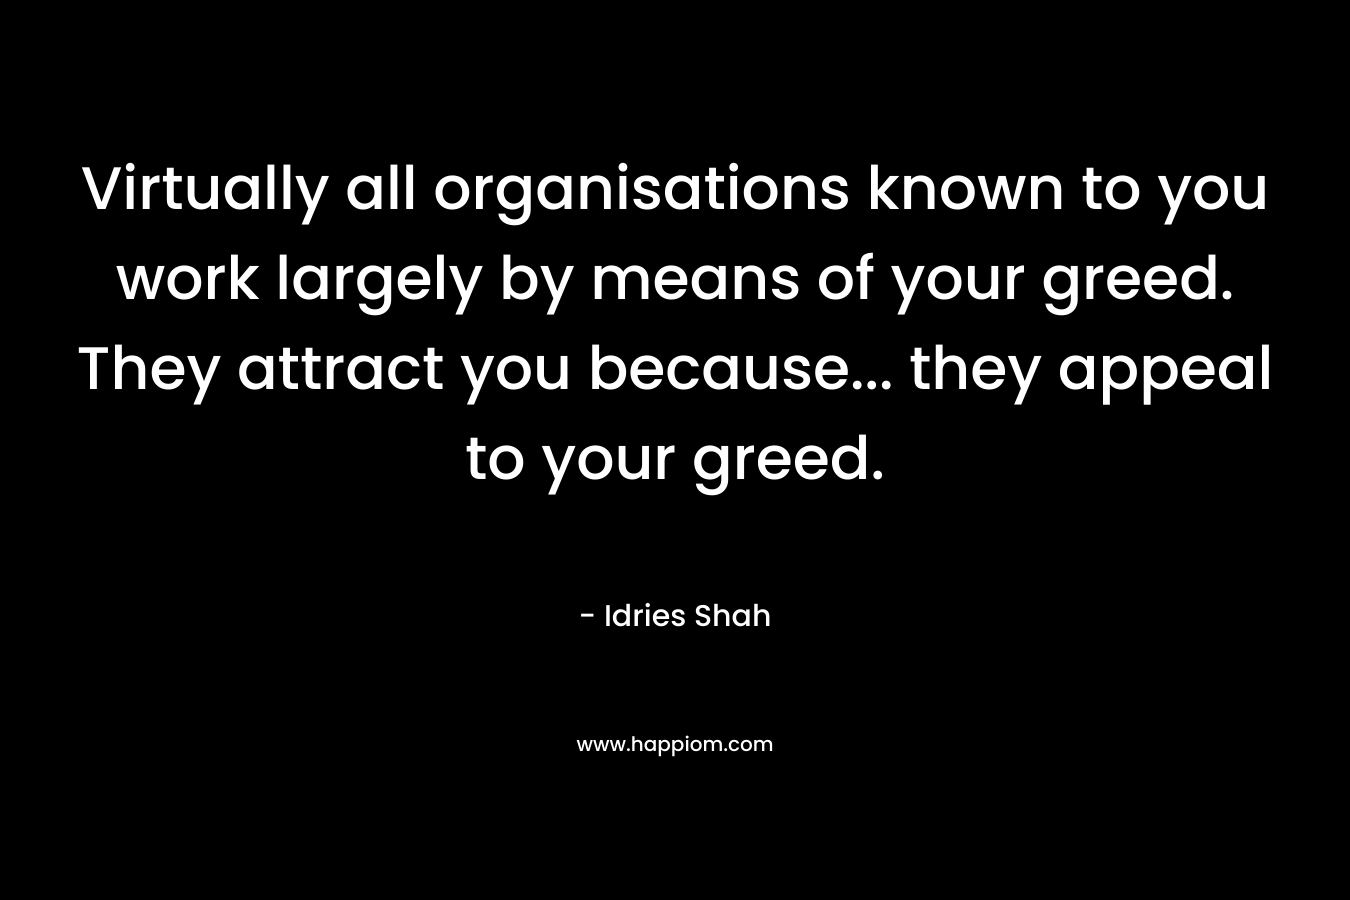 Virtually all organisations known to you work largely by means of your greed. They attract you because… they appeal to your greed. – Idries Shah